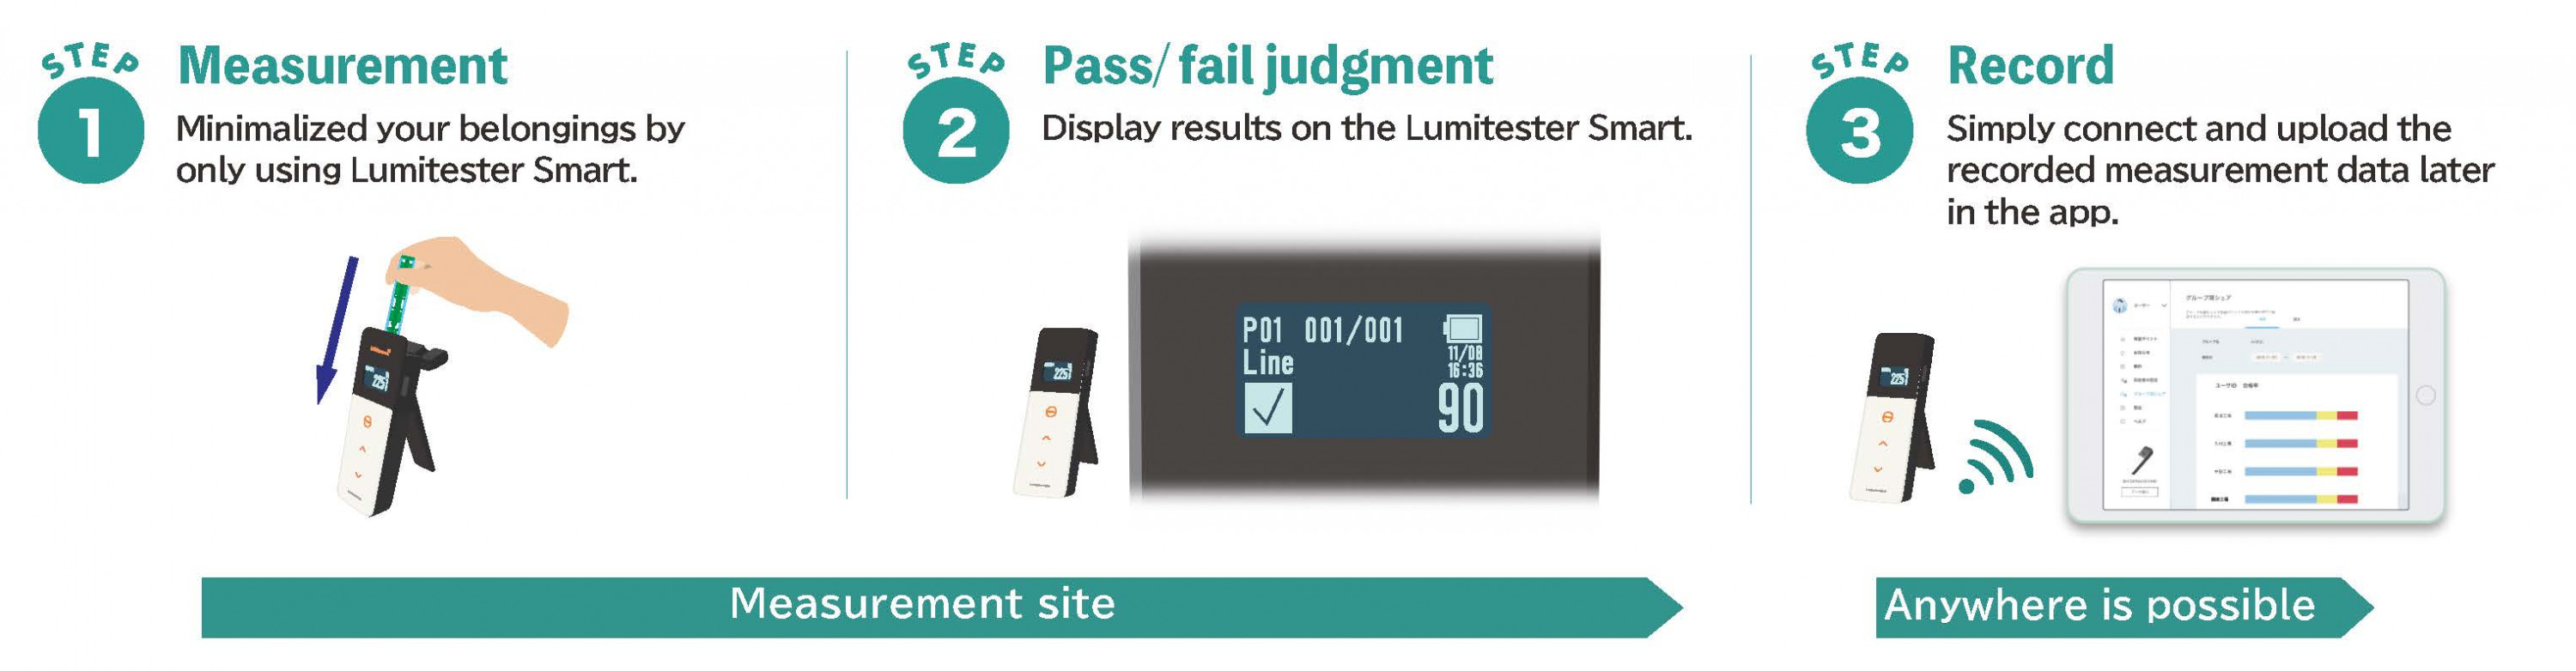 Measure only using the Lumitester Smart＊